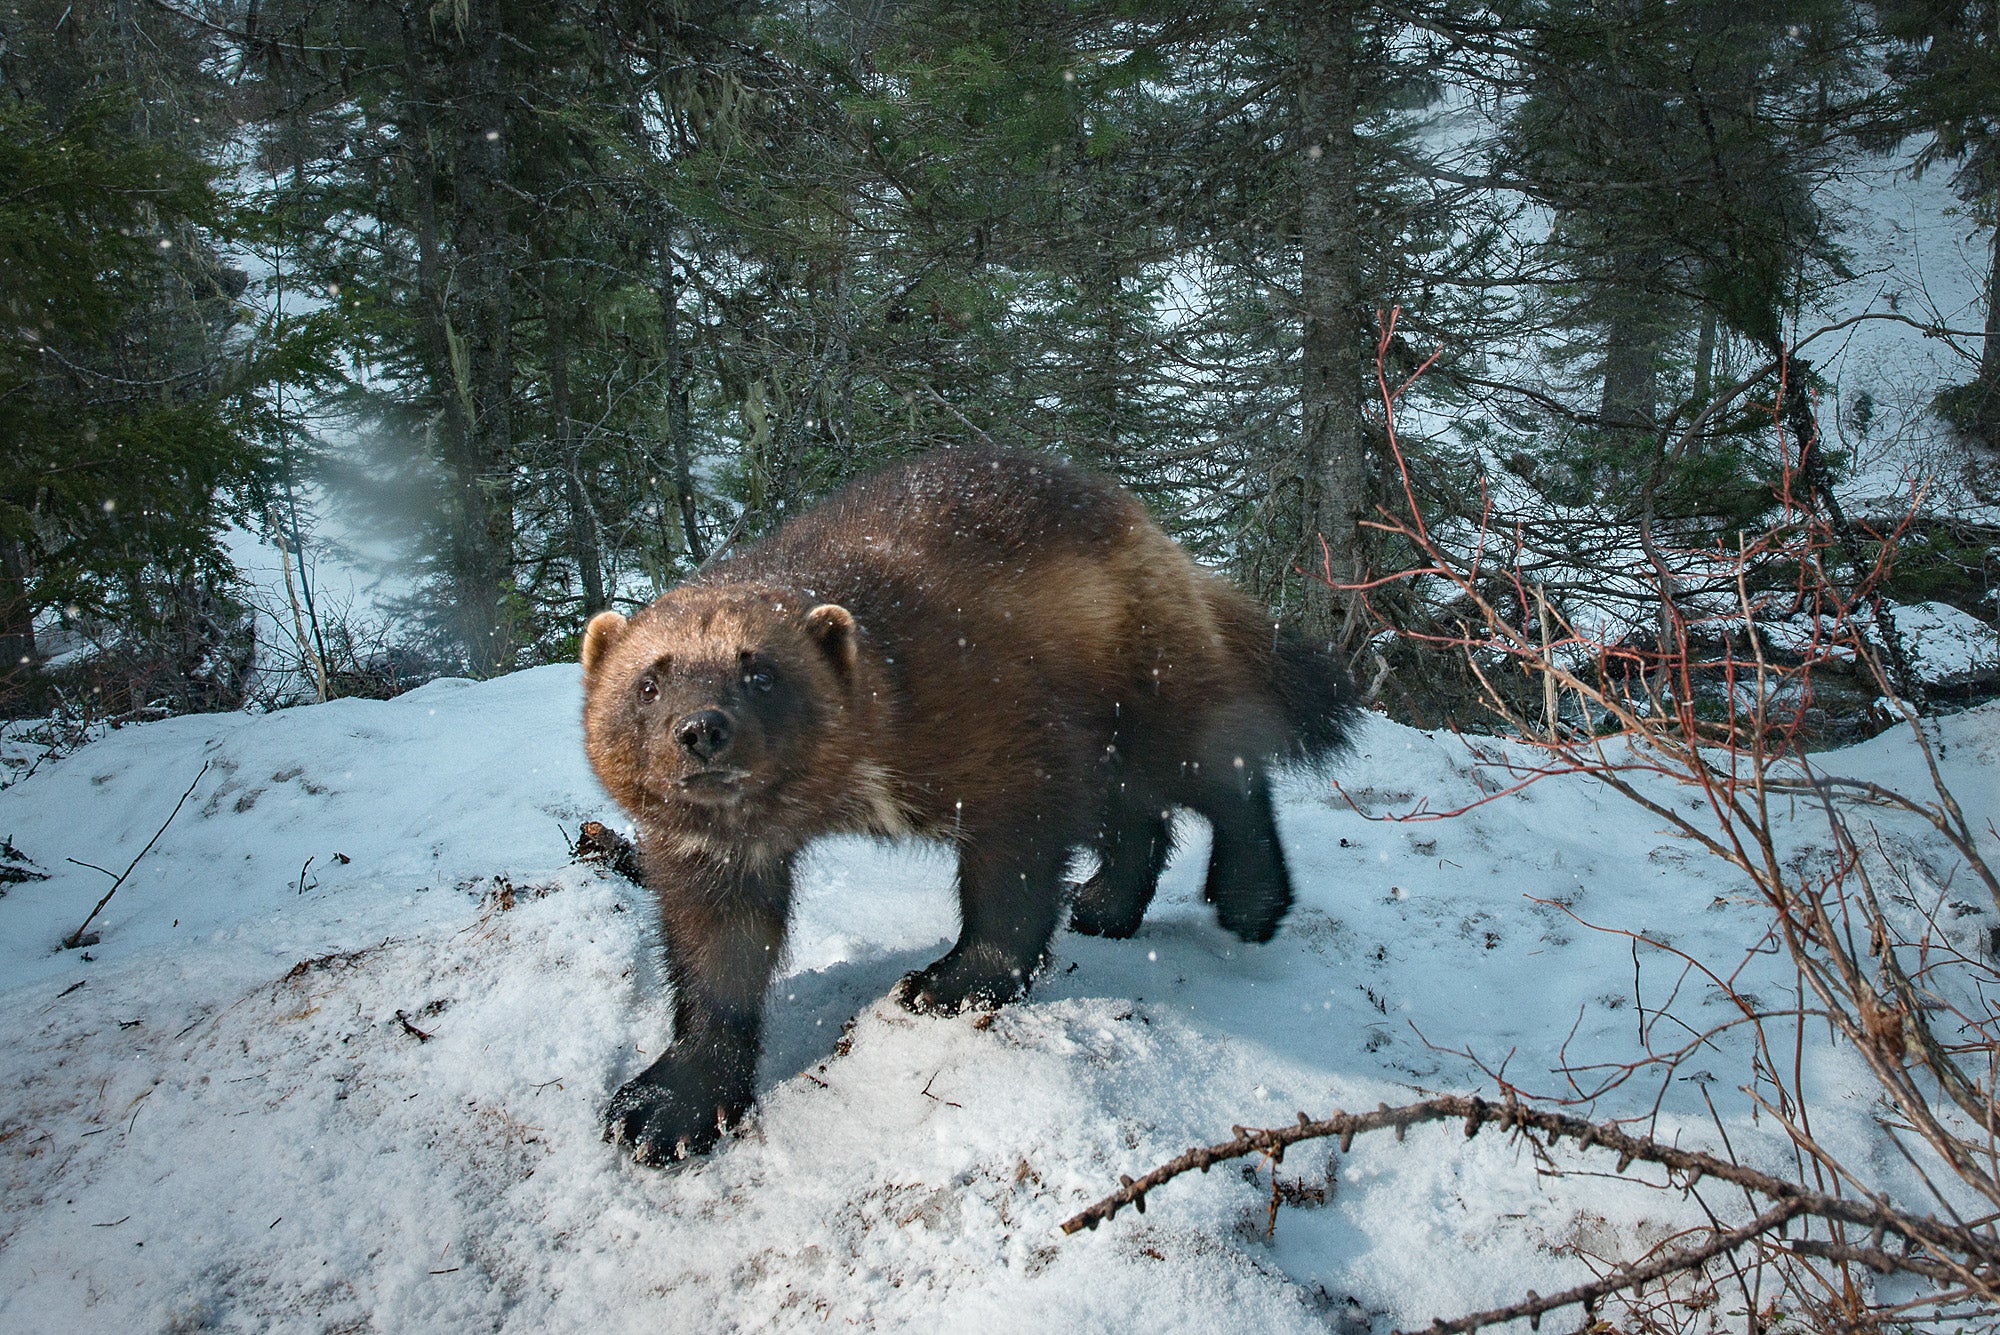 A wolverine photographed in the wild using a camera trap in Western Montana. The photo was made under a special use permit with the Flathead and Lolo National Forests.